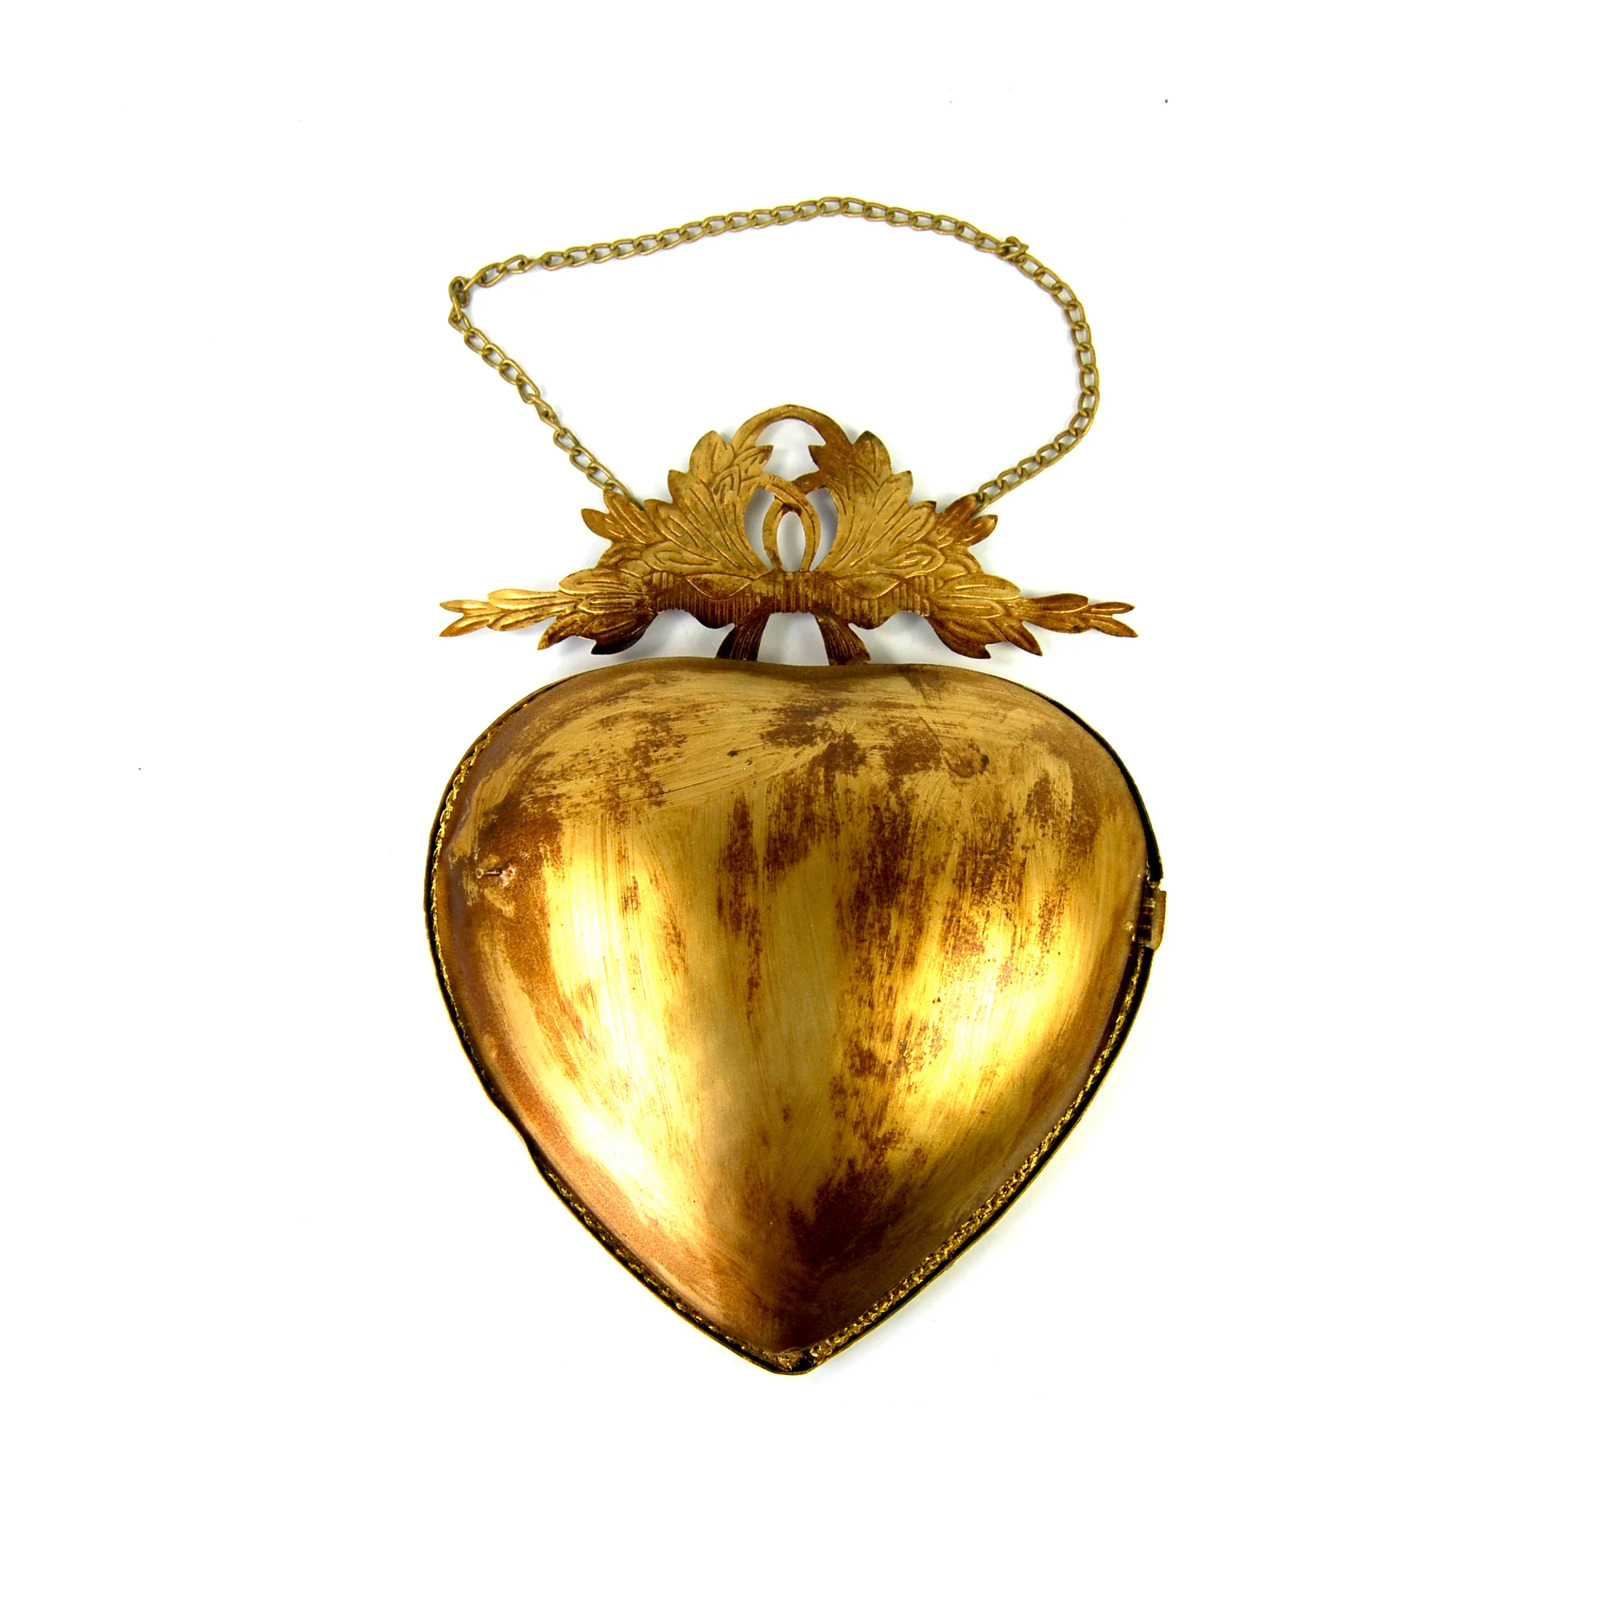 7.75in Ex Voto WALL MIRROR Sacred Heart Locket, Antiqued Gold Accent Mirrors